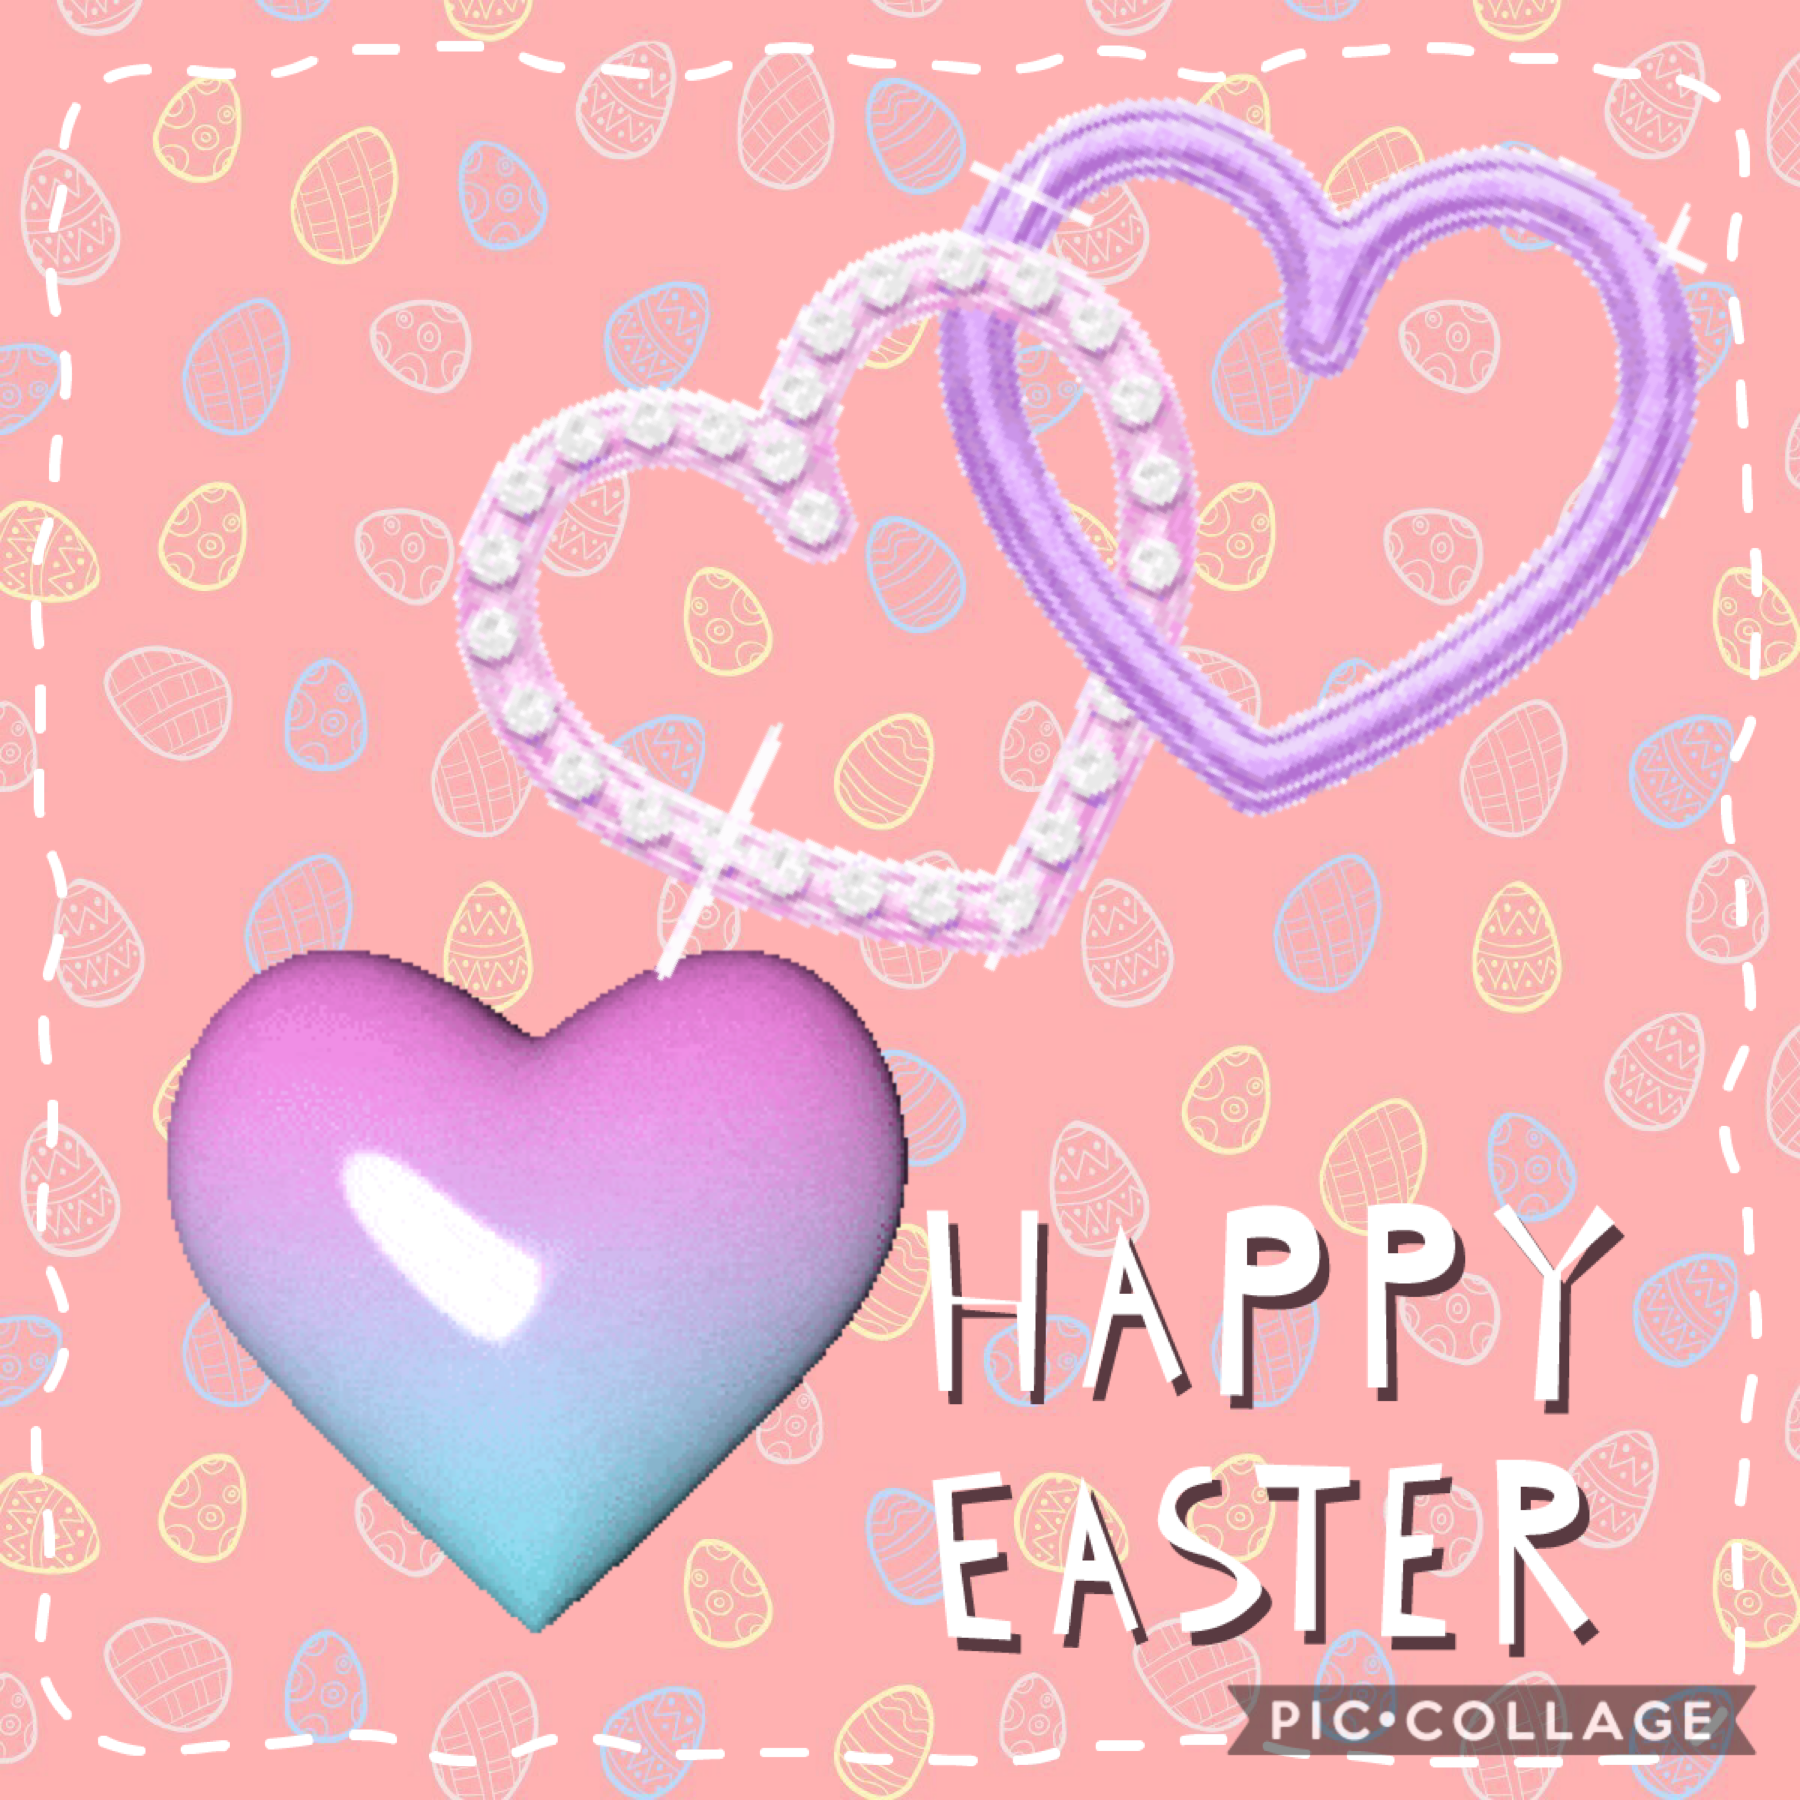 Happy Easter everyone. Hope everyone is safe